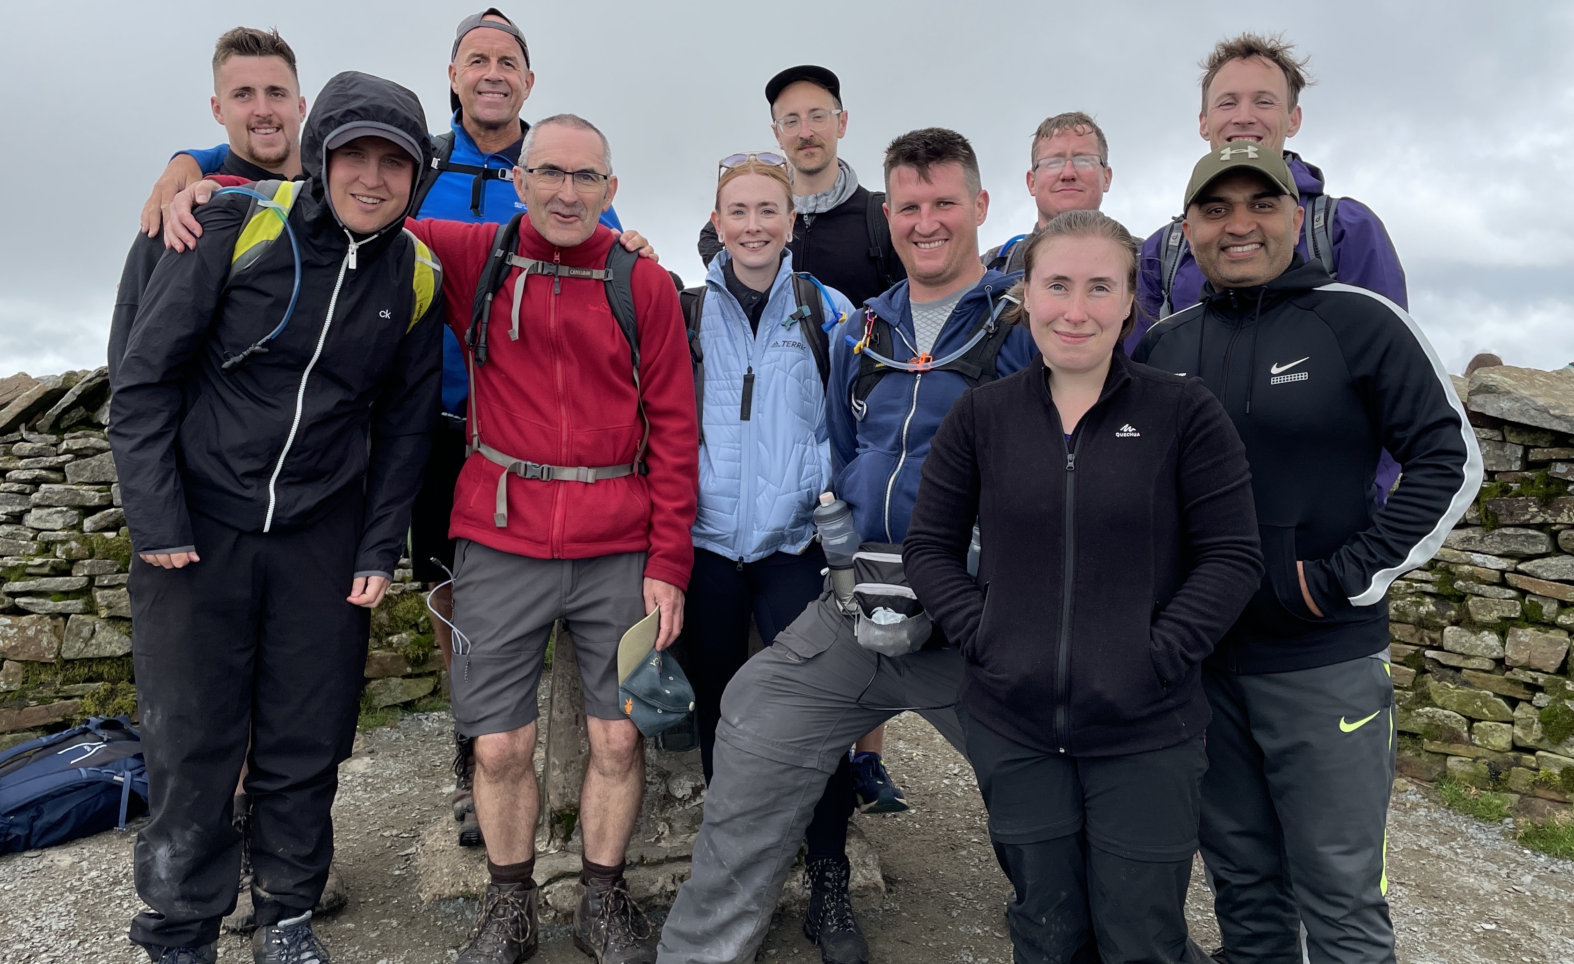 LSUK team scales the Yorkshire peaks to raise over £2200 for children’s charity